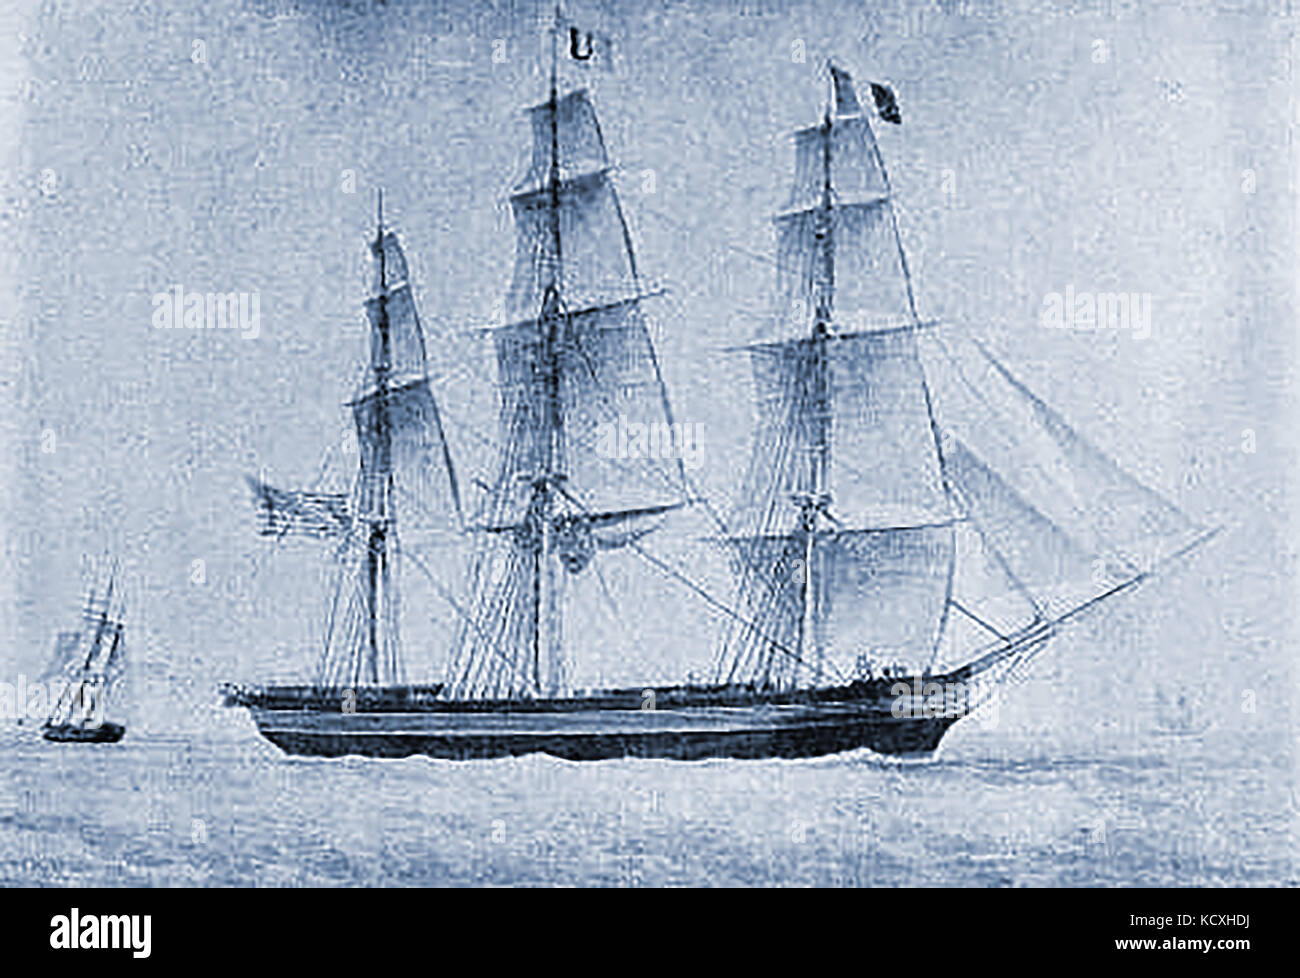 The US Ship CHARLEMAGNE - Built 1824 Stock Photo